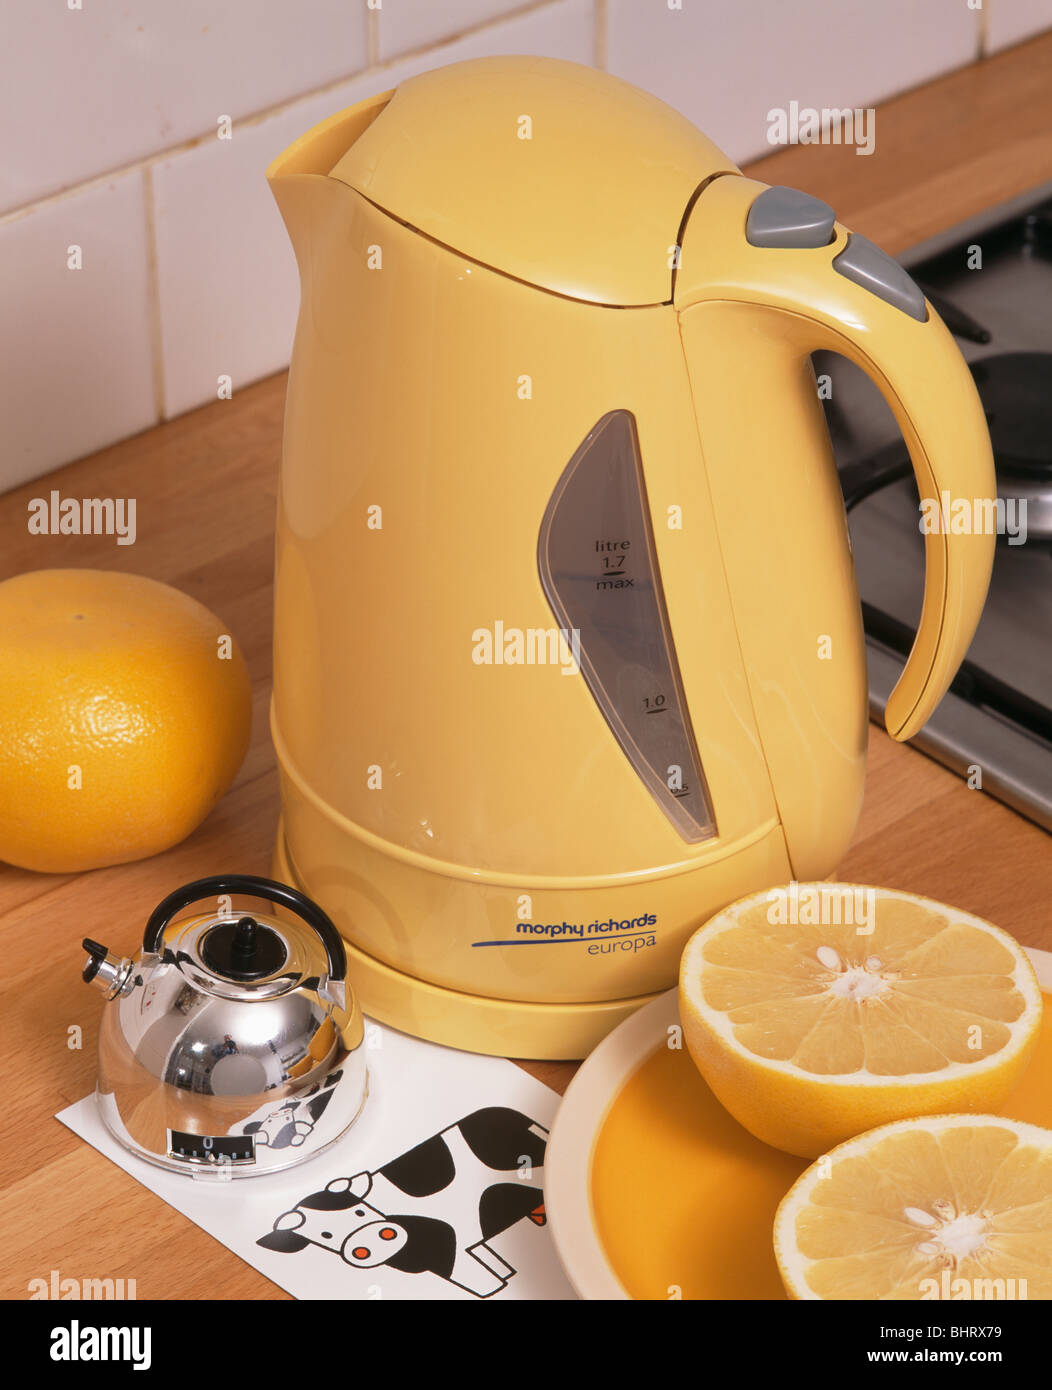 https://c8.alamy.com/comp/BHRX79/close-up-of-bright-yellow-plastic-kettle-and-small-kettle-shaped-chrome-BHRX79.jpg